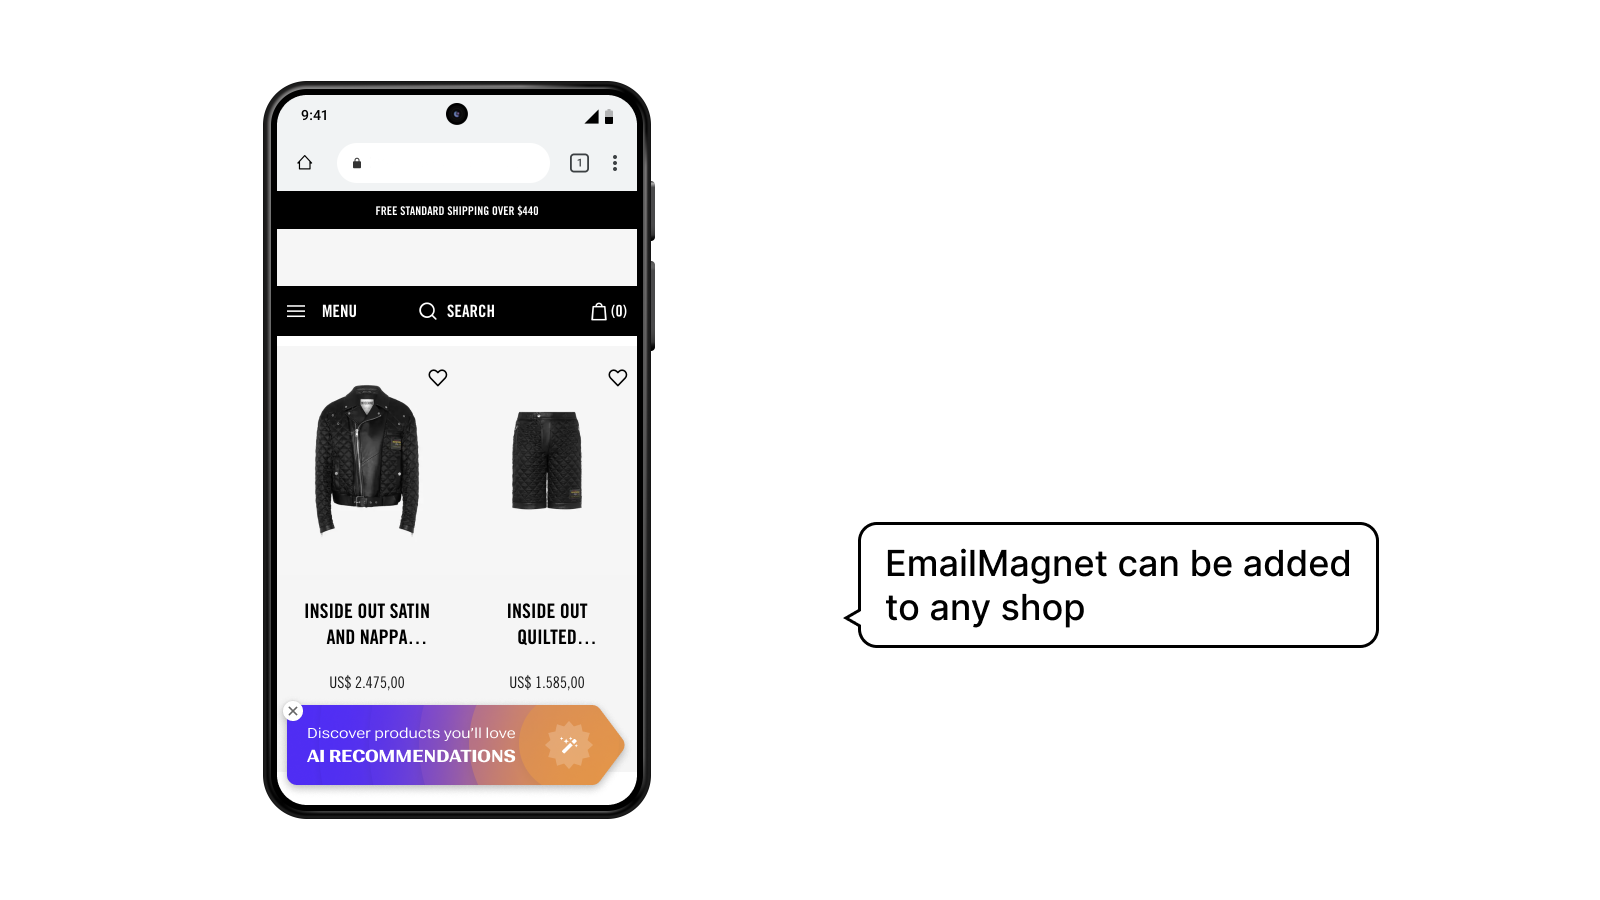 EmailMagnet can be added to any shop